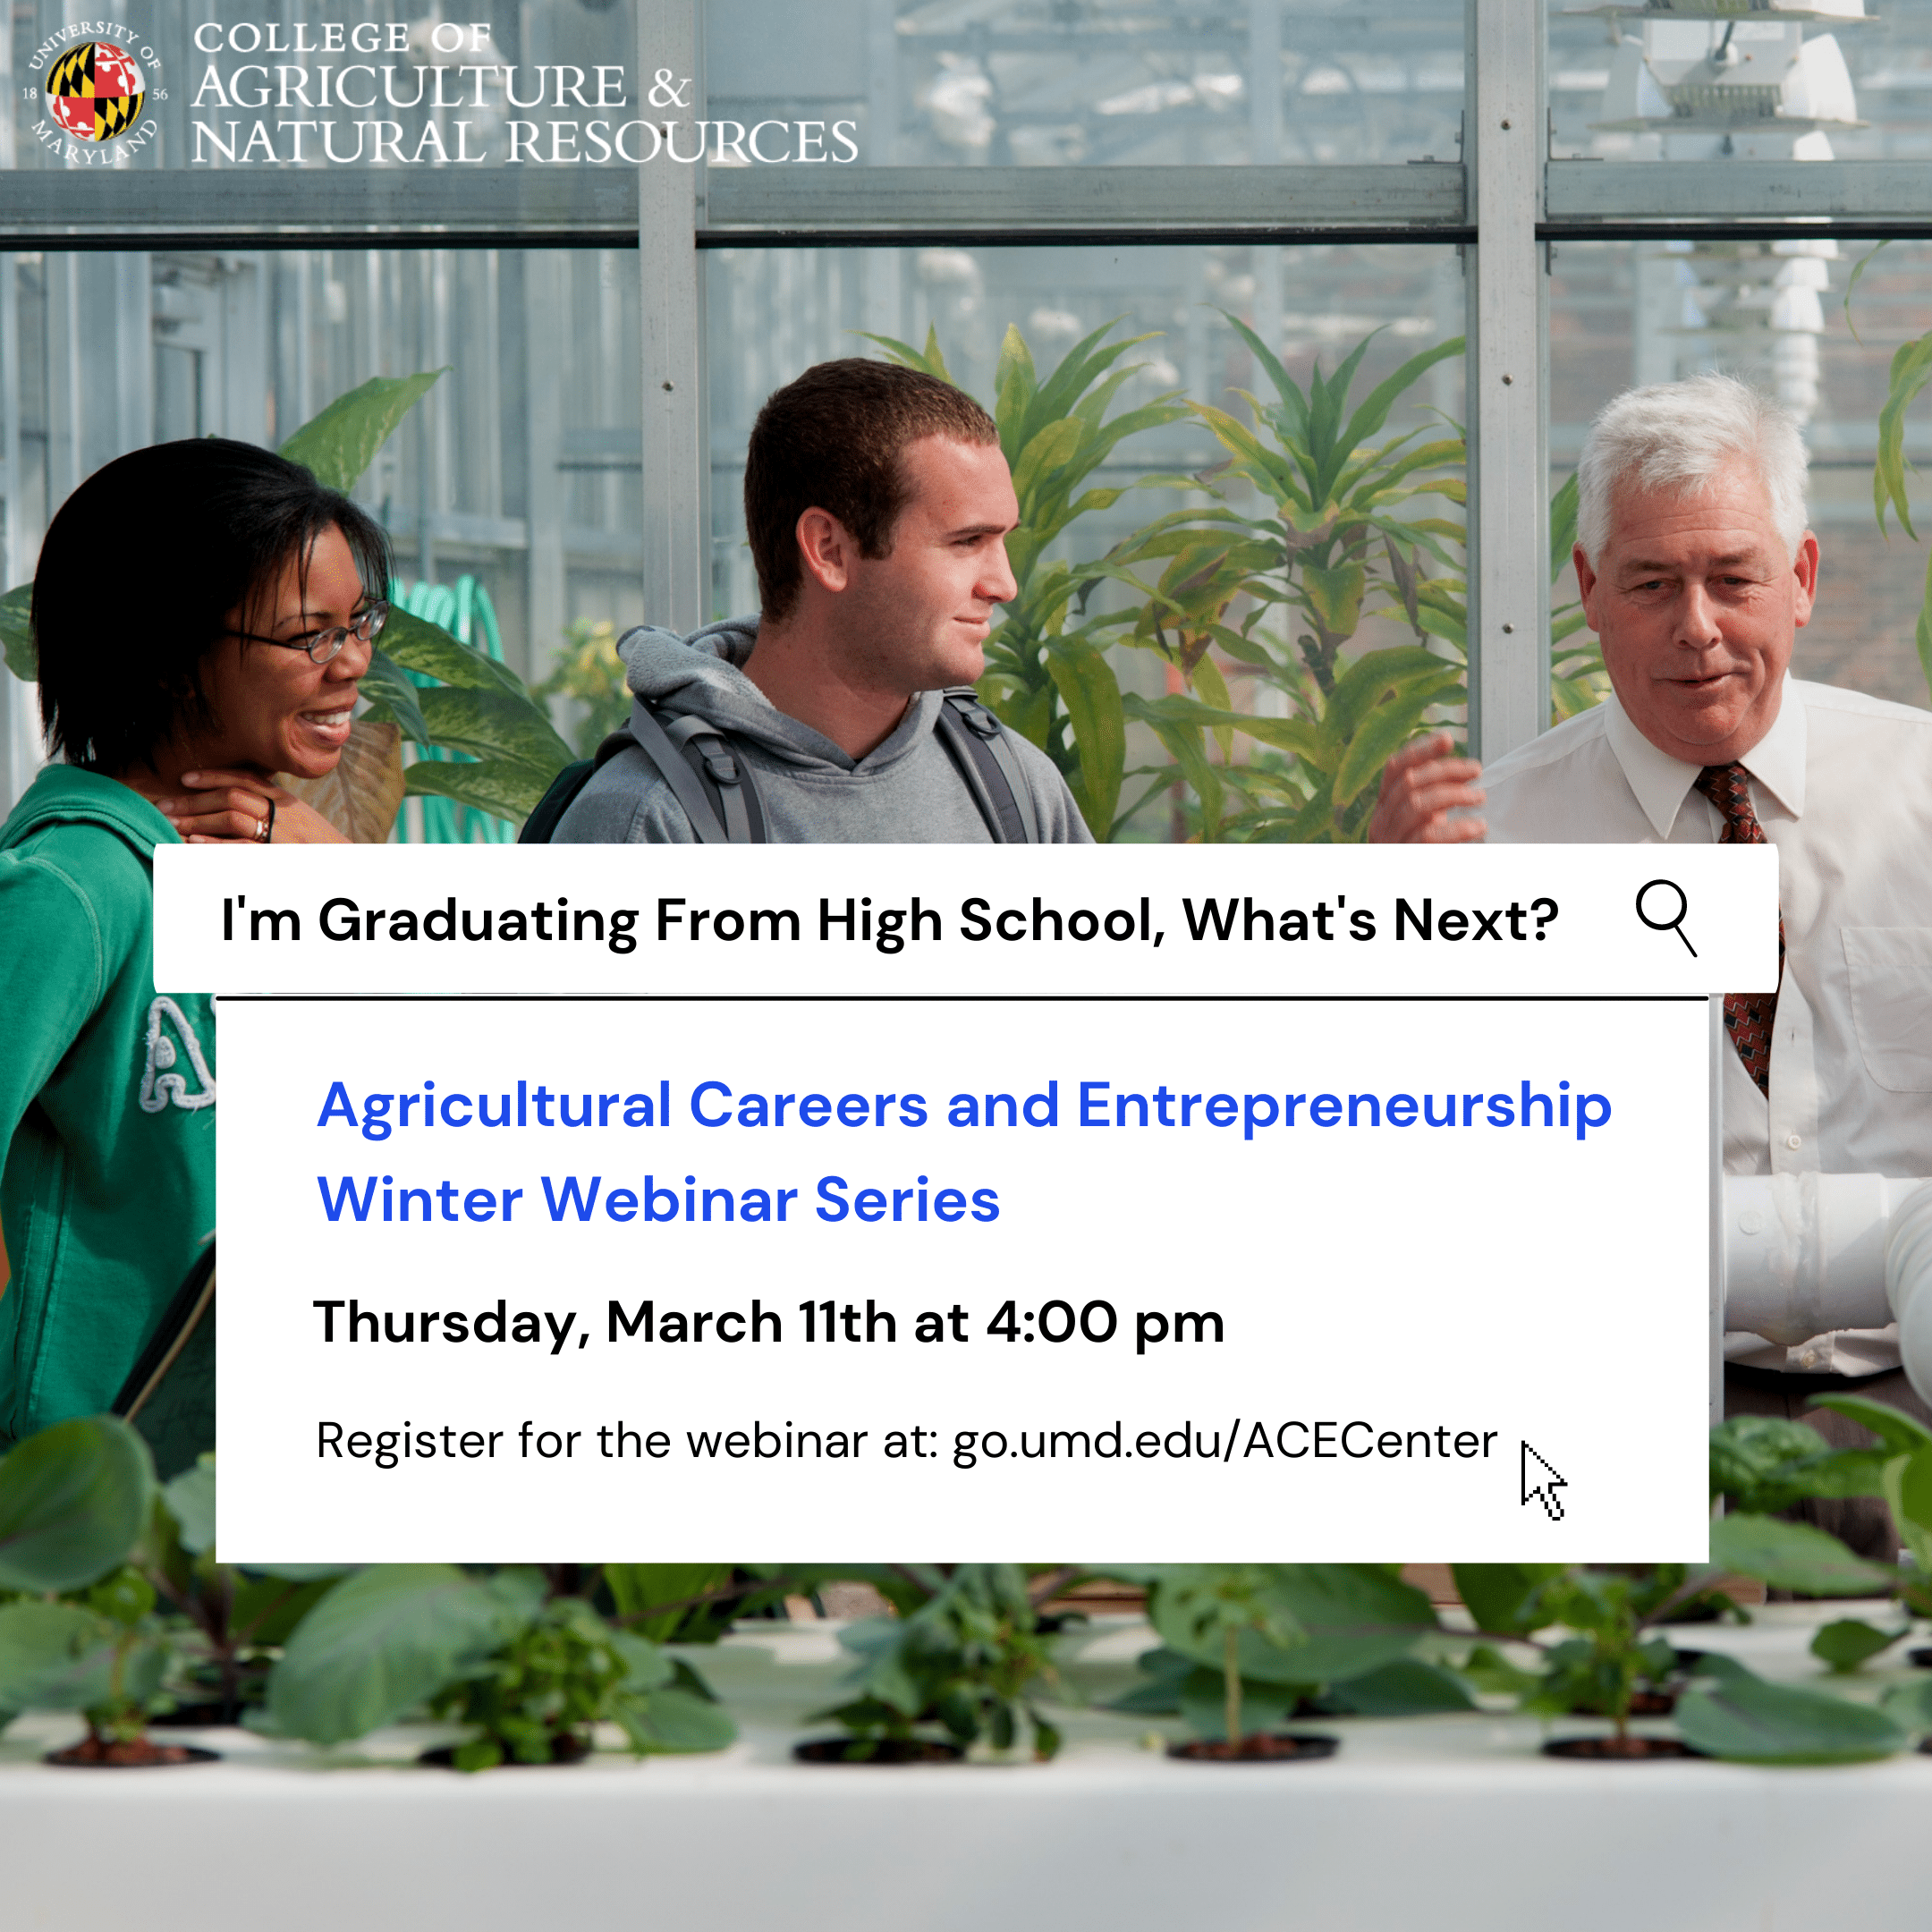 I'm graduating from high school, what's next? flyer that looks like a search engine bar with a background image of a professor teaching a class in the greenhouse